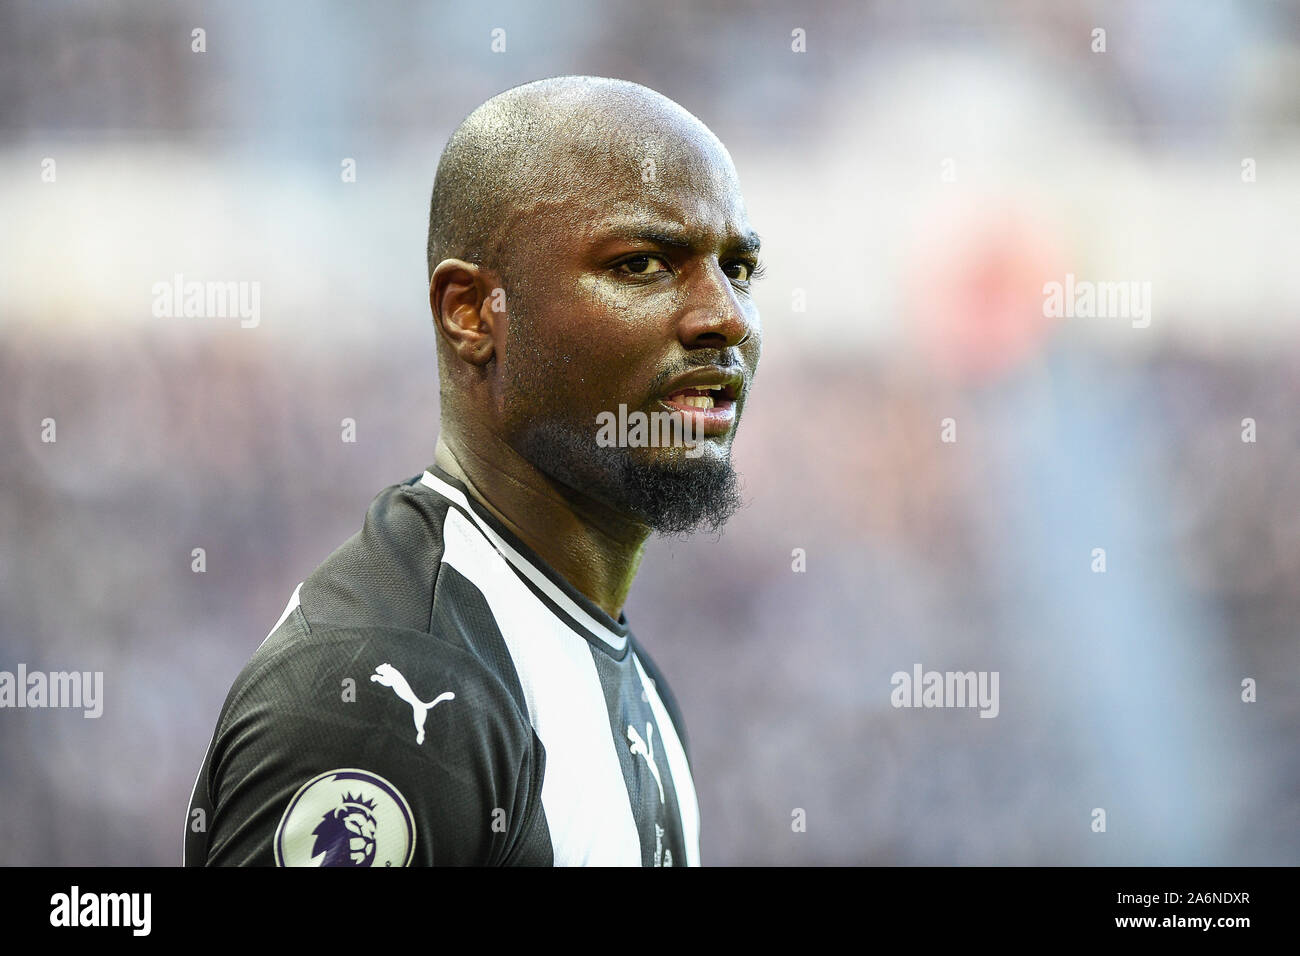 27th October 2019, St. James's Park, Newcastle, England; Premier League, Newcastle United v Wolverhampton Wanderers : Jetro Willems of Newcastle United in action Credit: Iam Burn/News Images Stock Photo